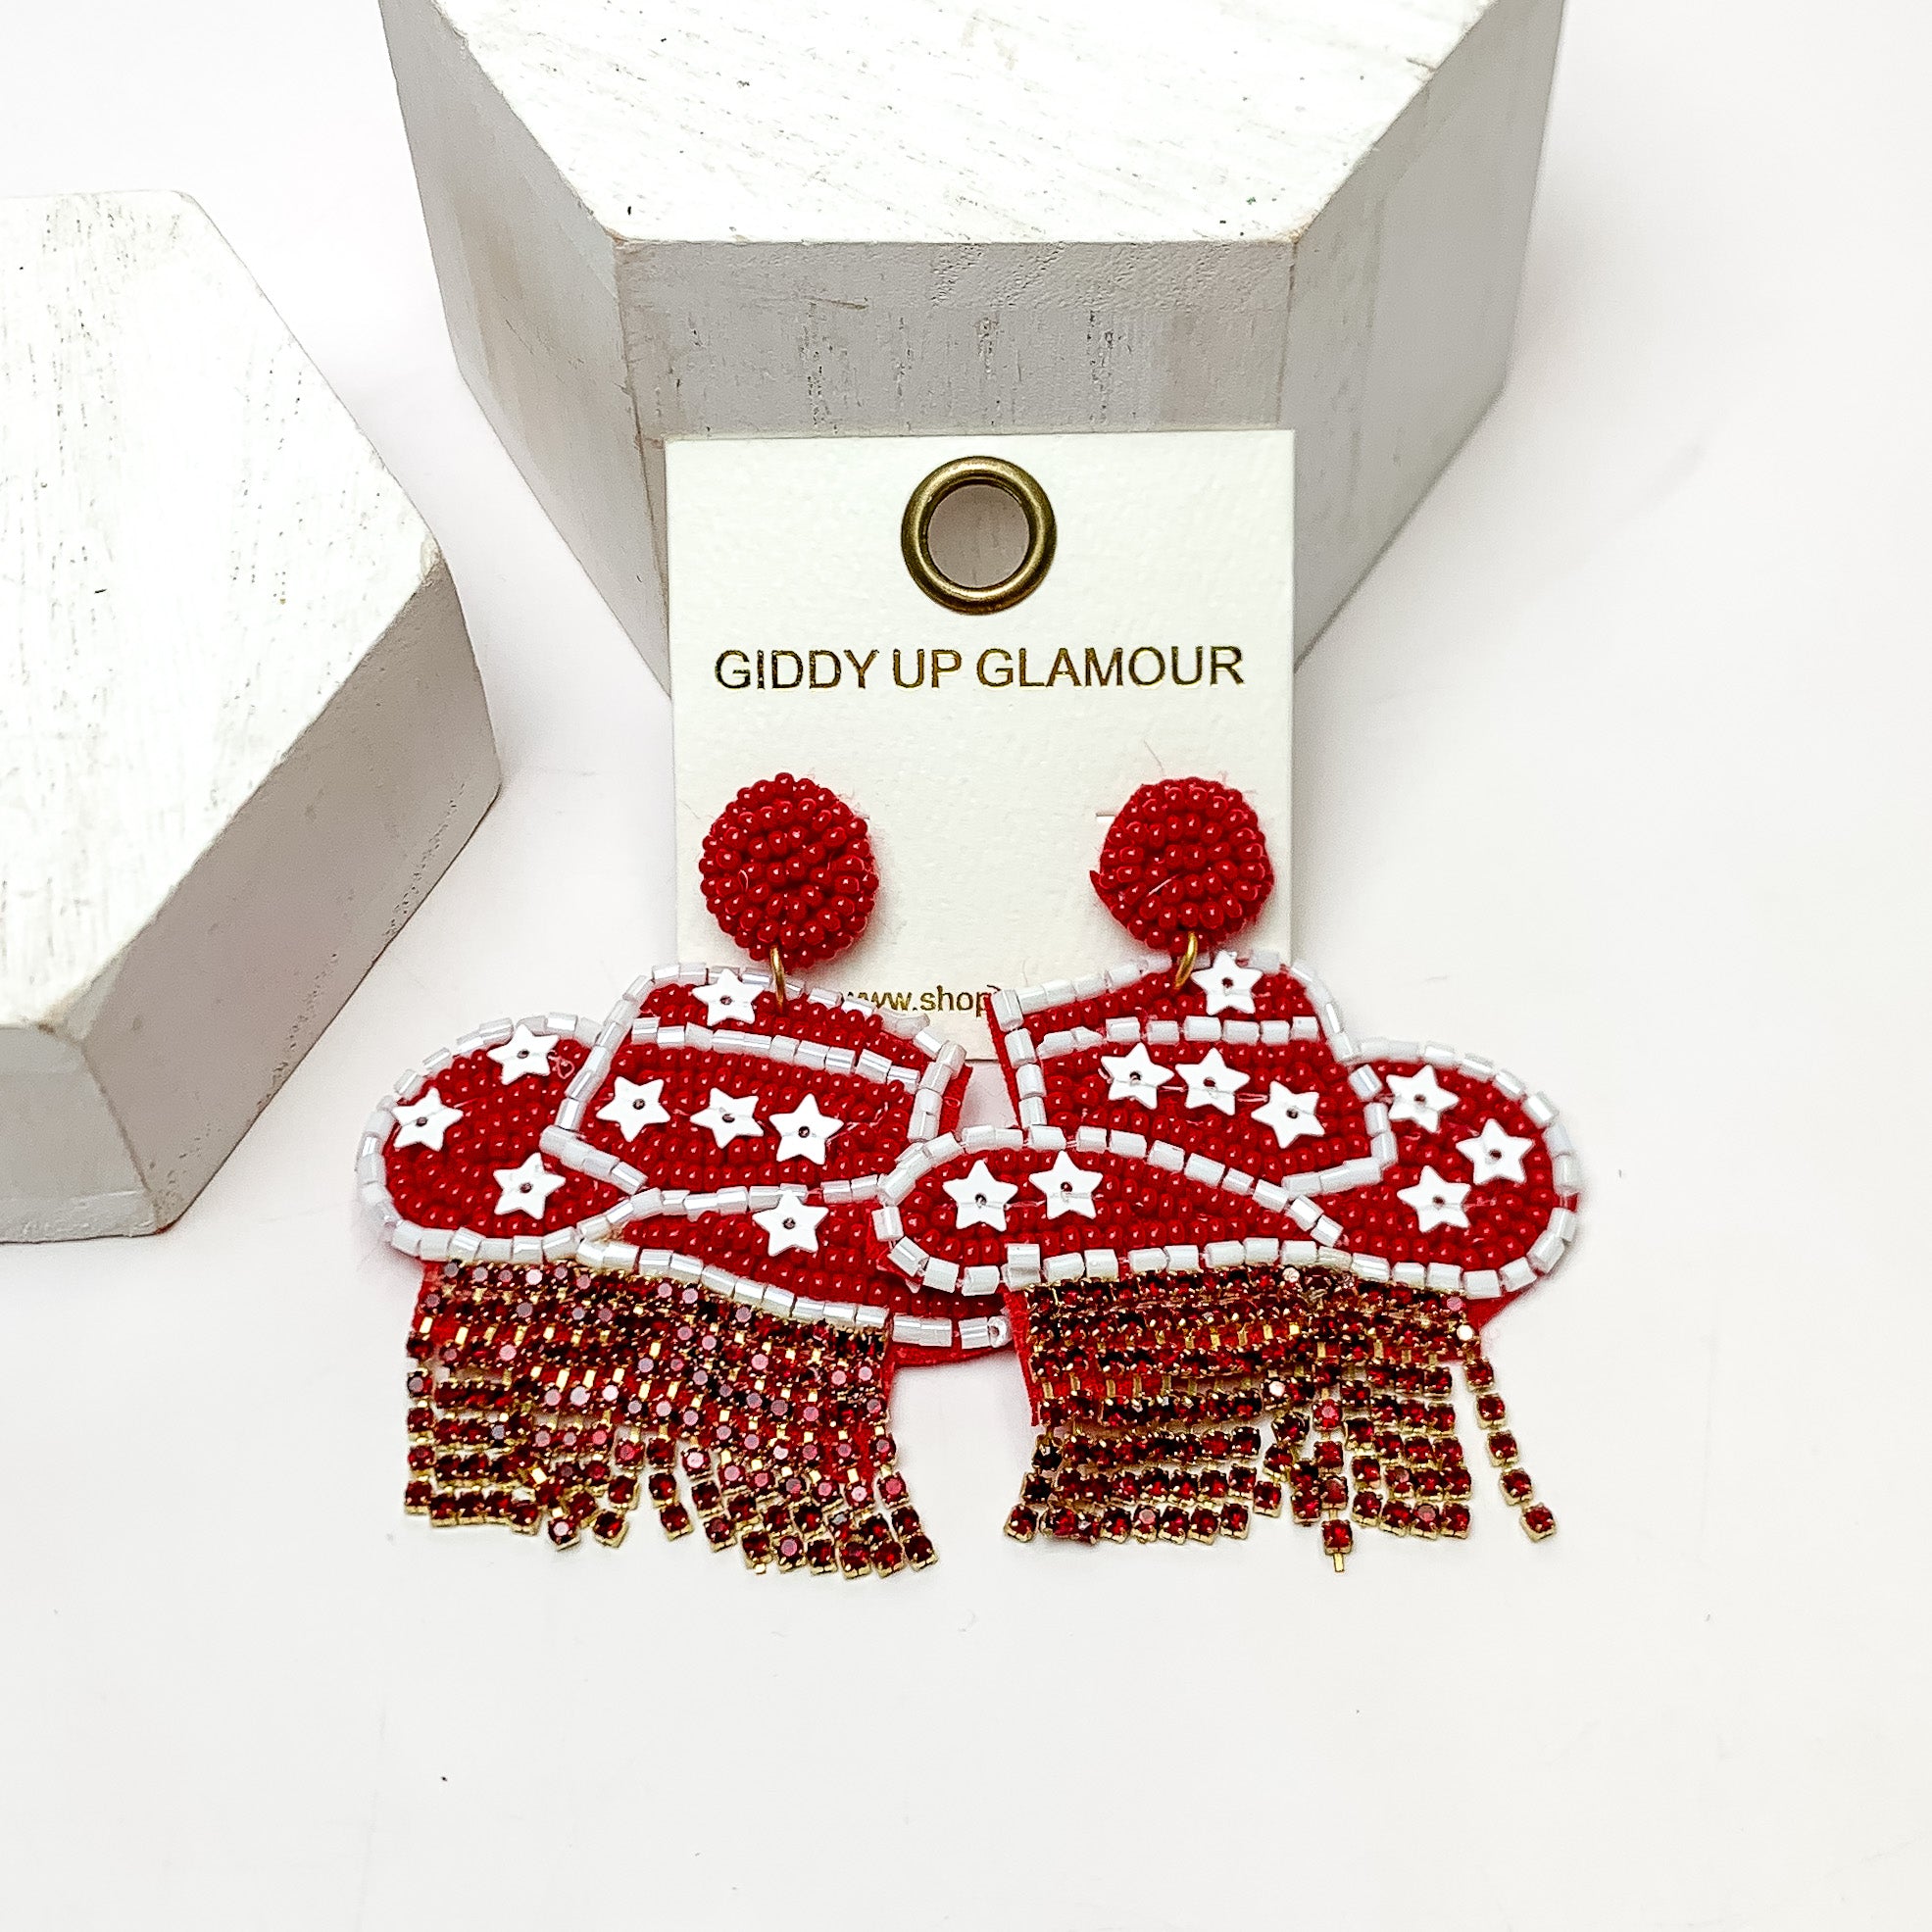 Gameday Beaded Cowboy Hat Earrings with White Crystal Fringe in Maroon and White. These earrings are pictured on a white background with white posts behind them.